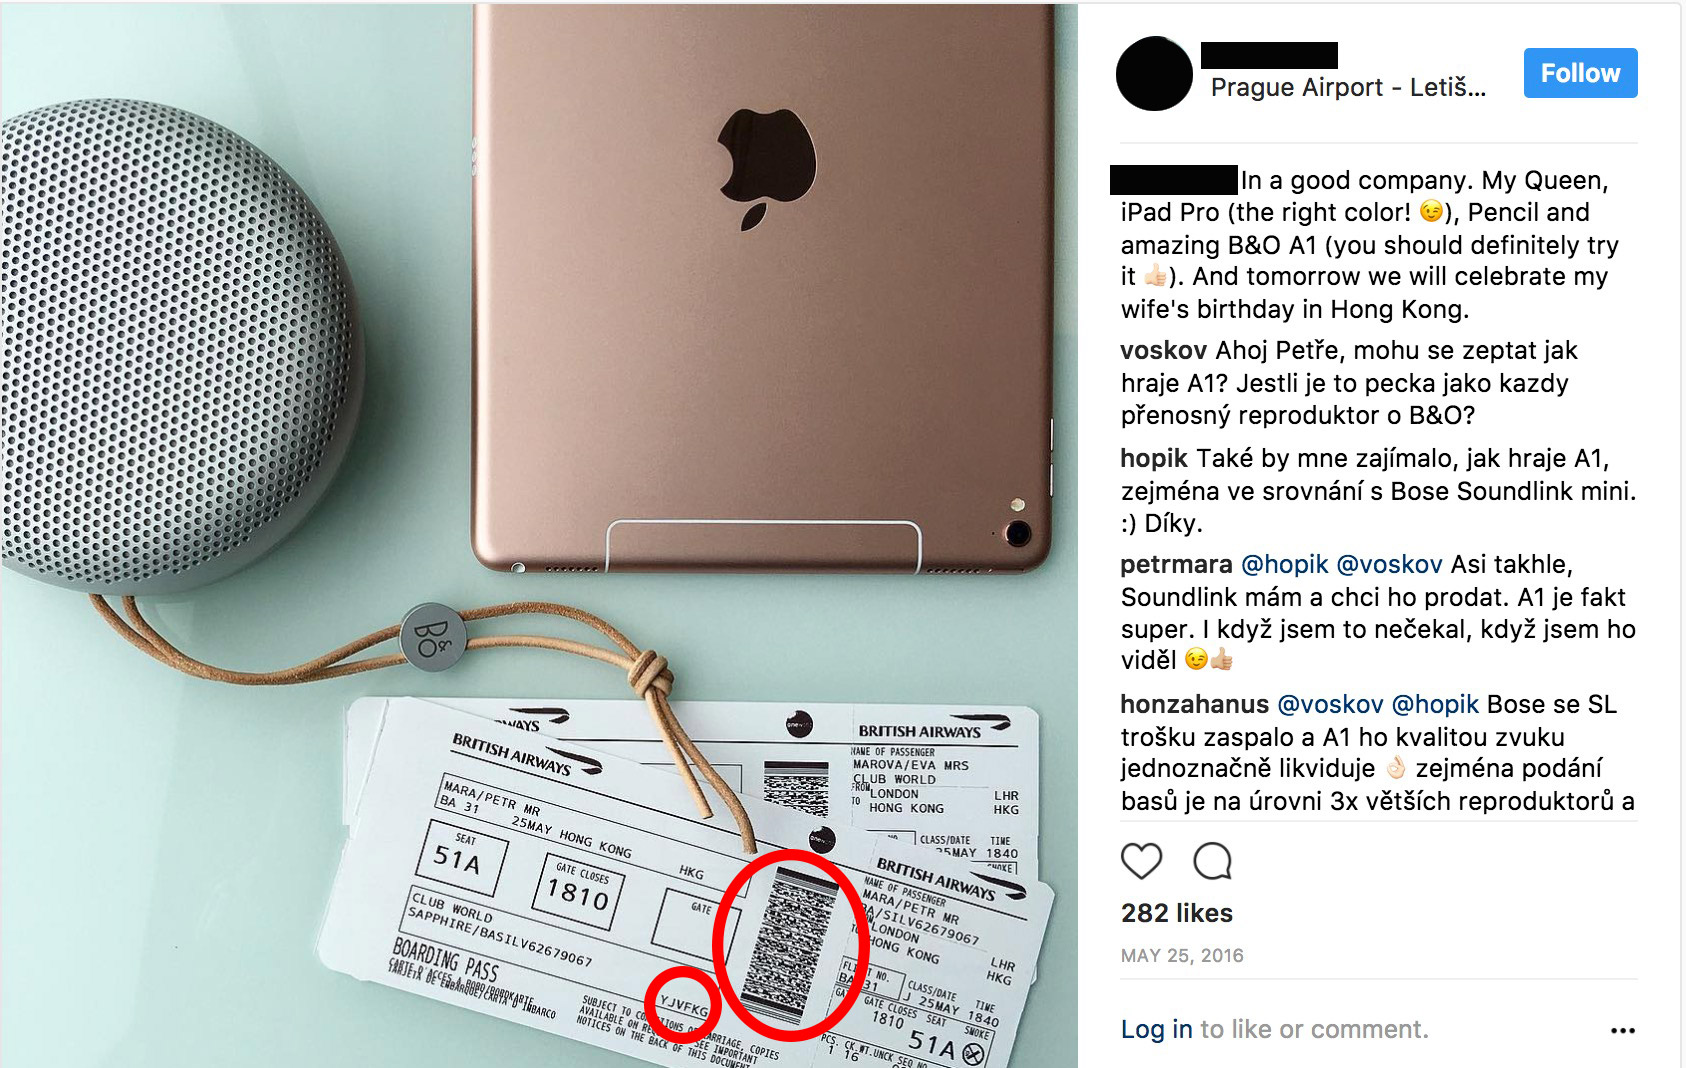 Why You Should Never Post Pictures Of Your Flight Tickets Or Keys